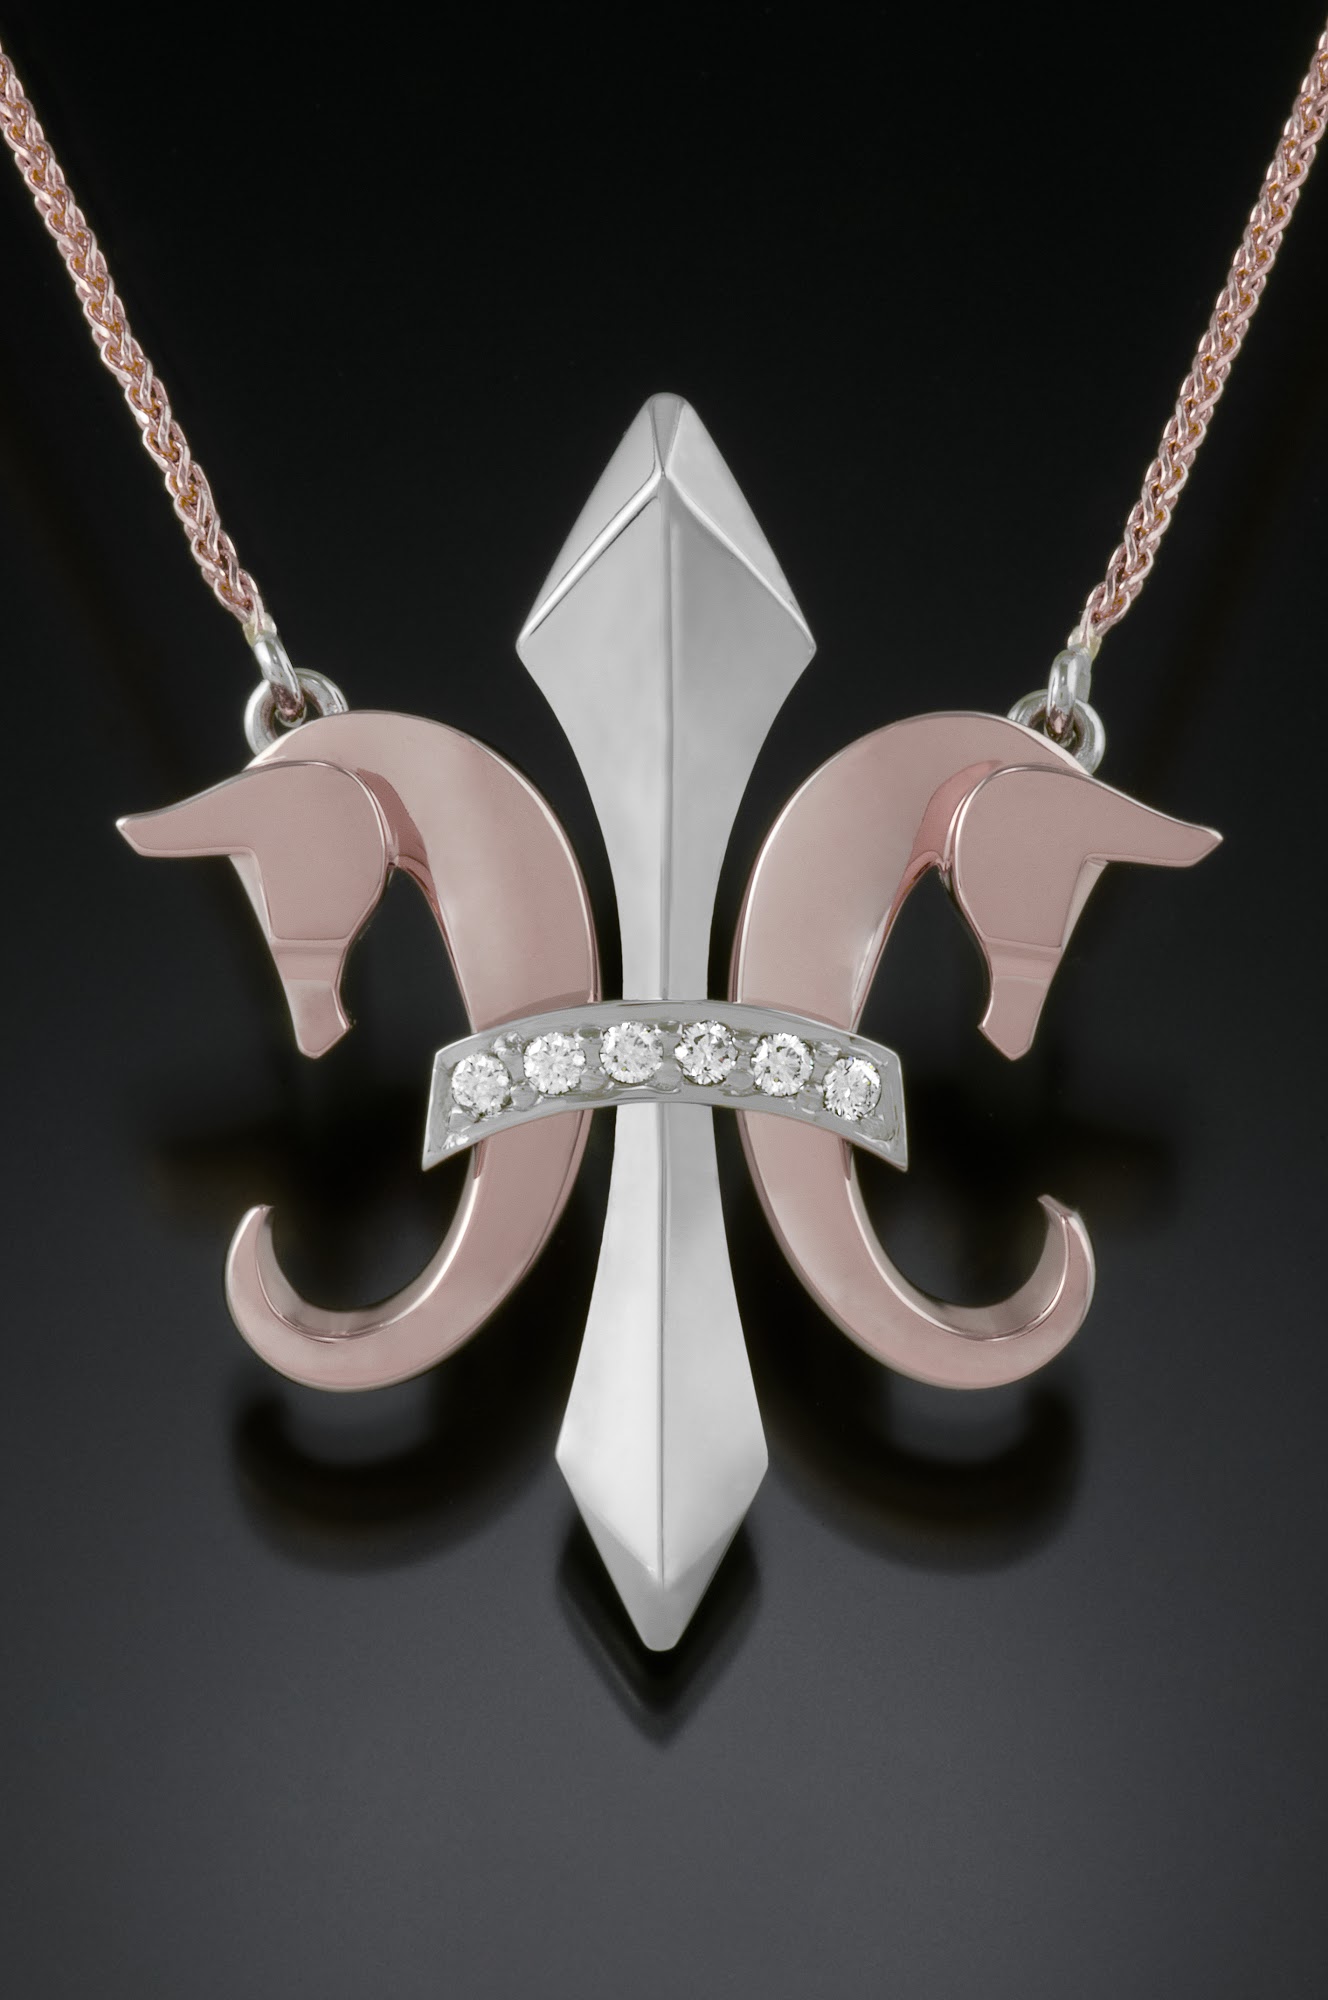 The Classic Horse Equestrian Jewelry Collection